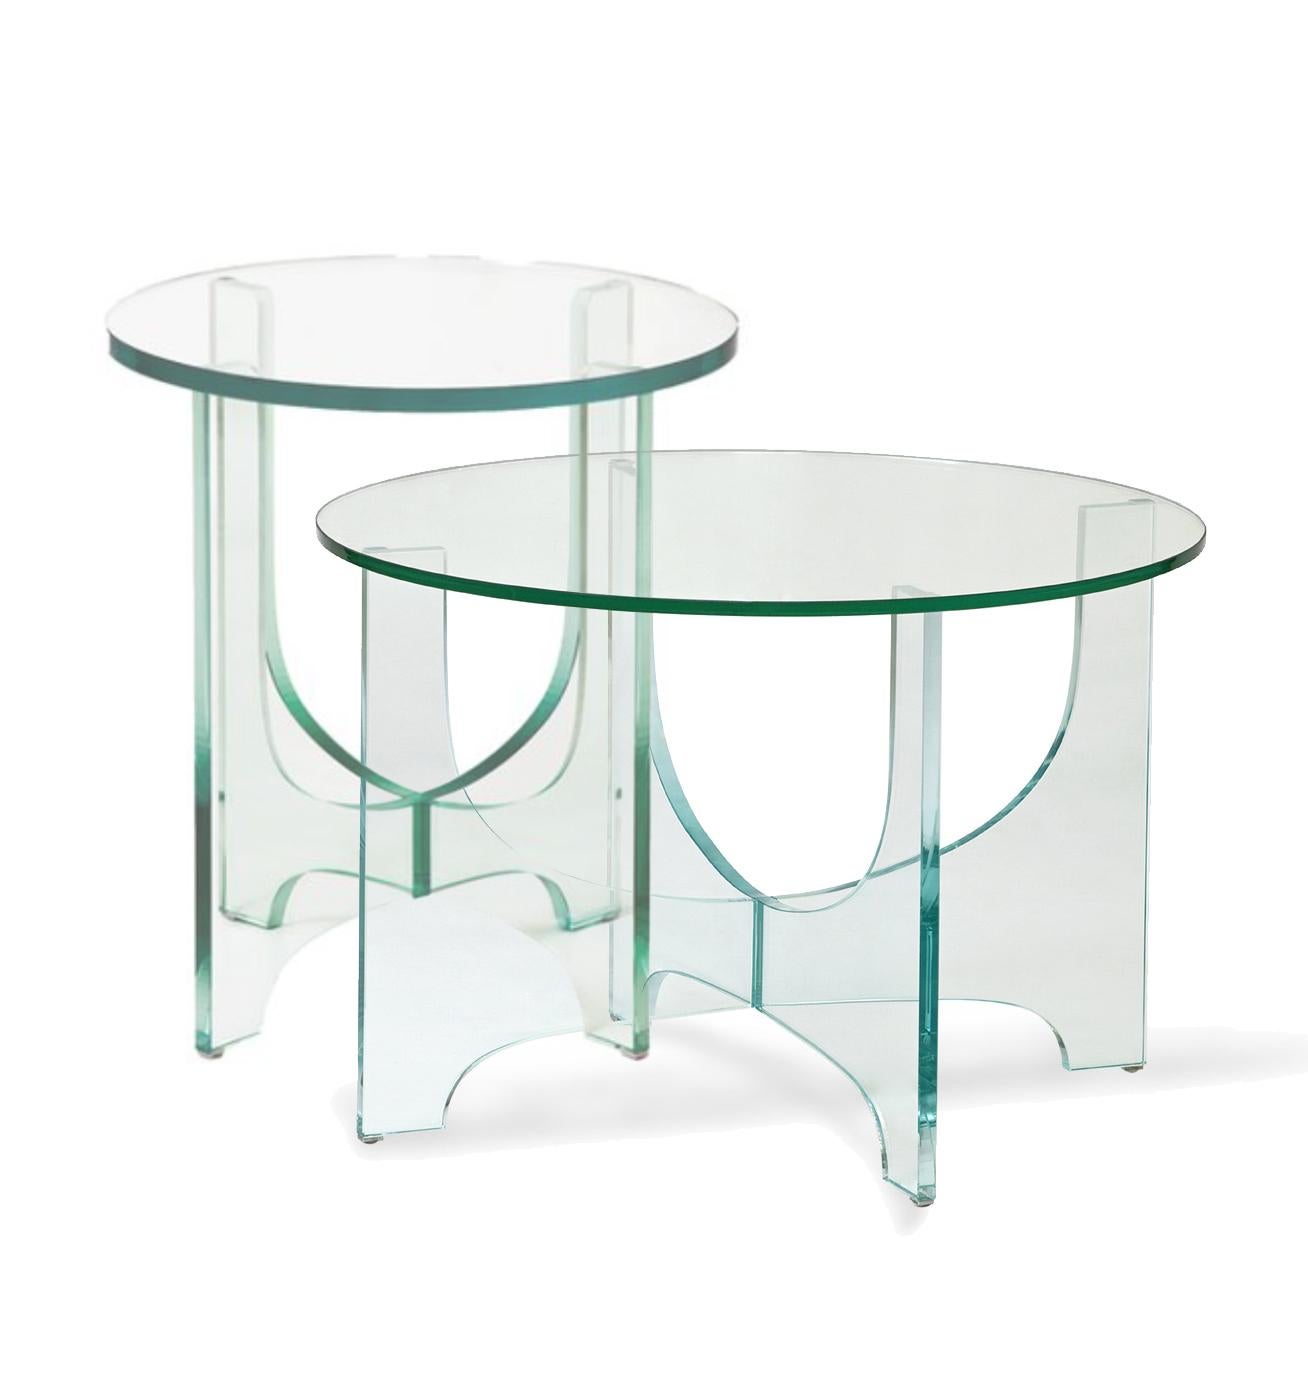 Side table made entirely of glass.

Materials: 
15mm thick clear glass.
  